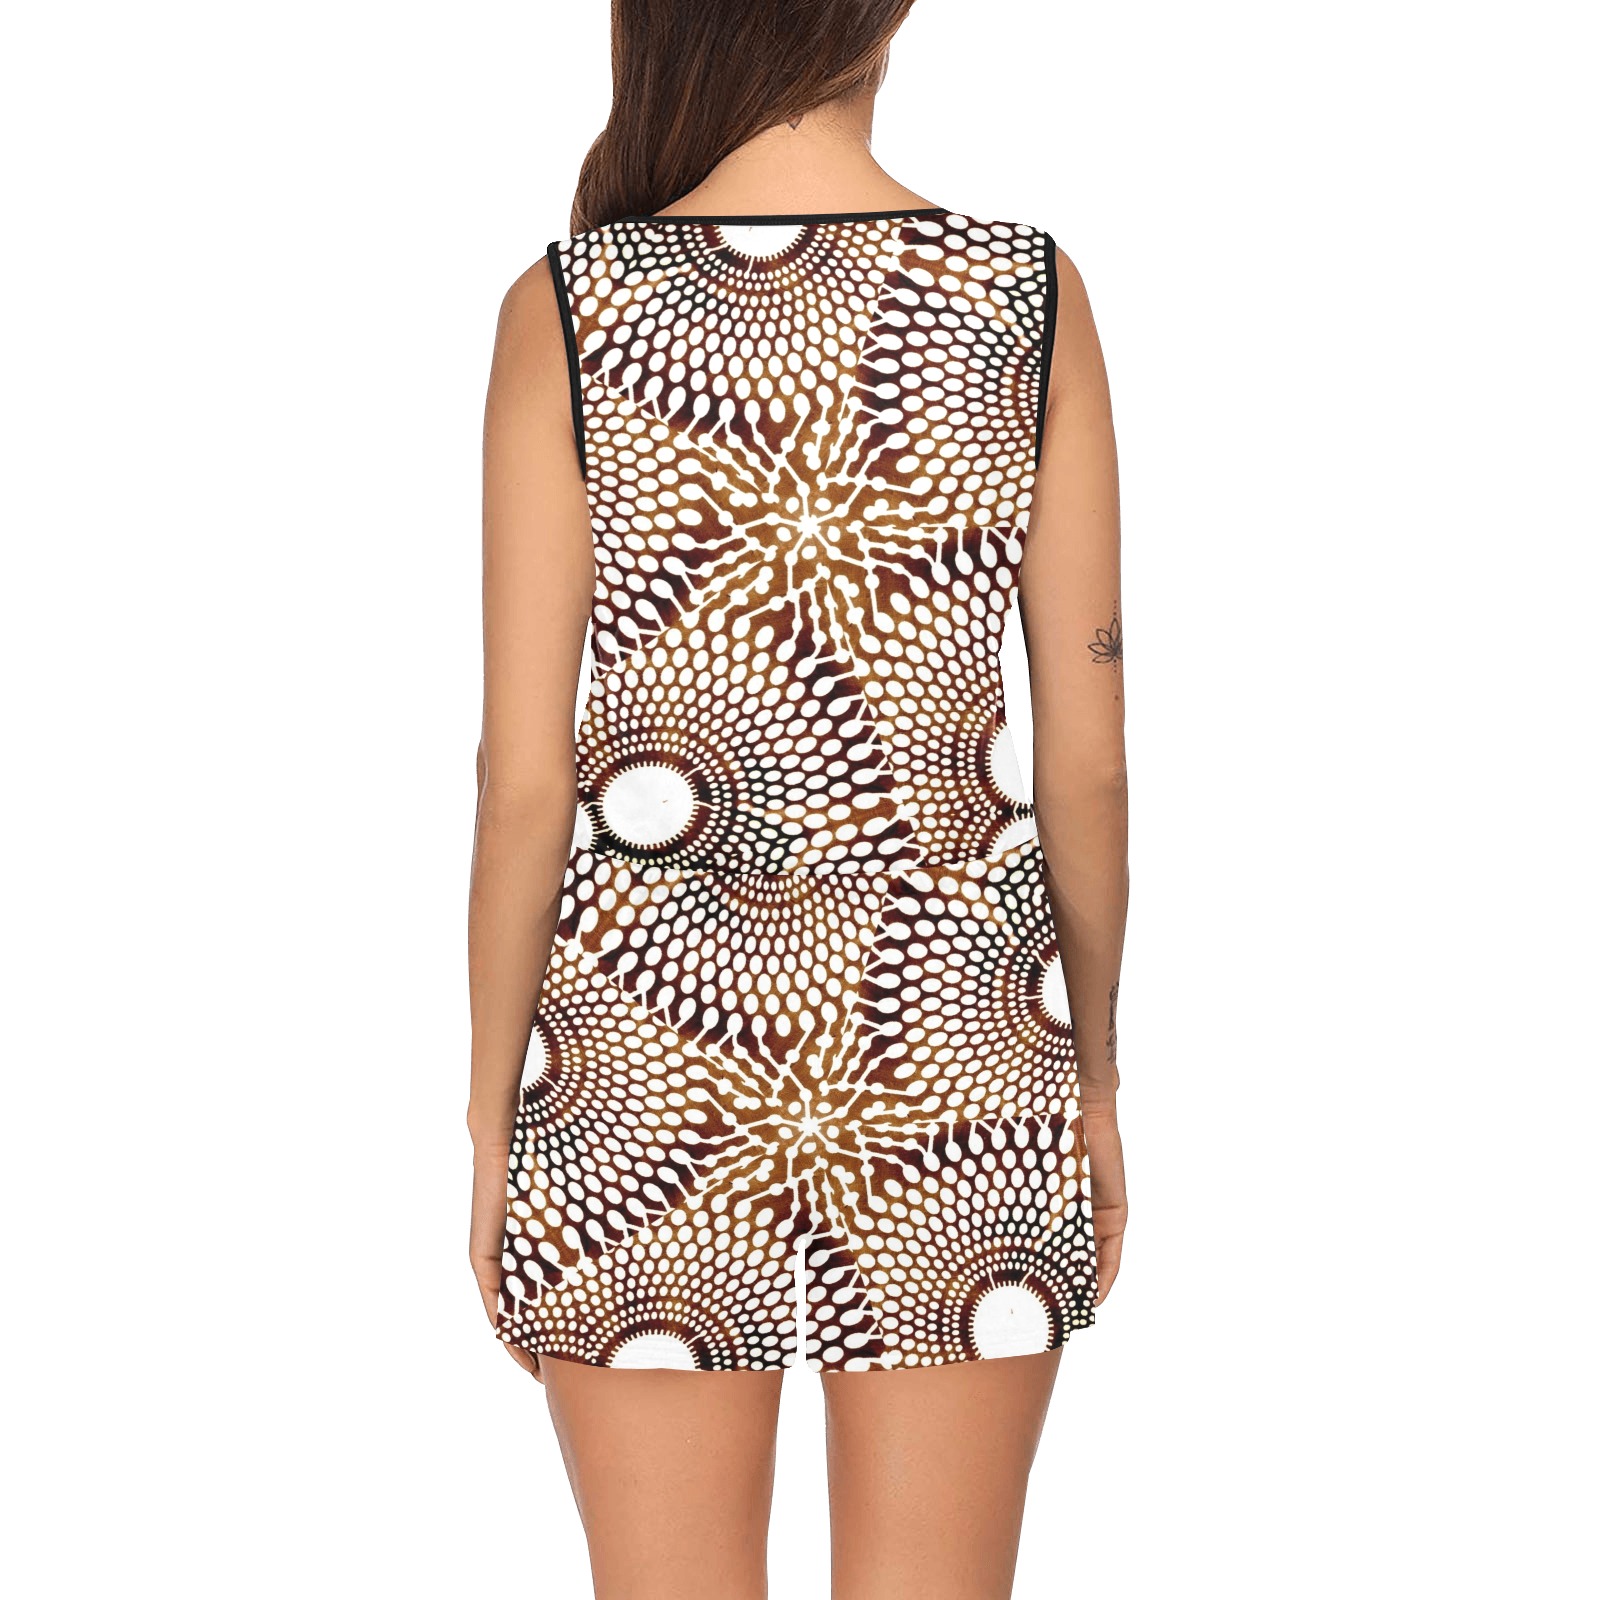 AFRICAN PRINT PATTERN 4 All Over Print Short Jumpsuit